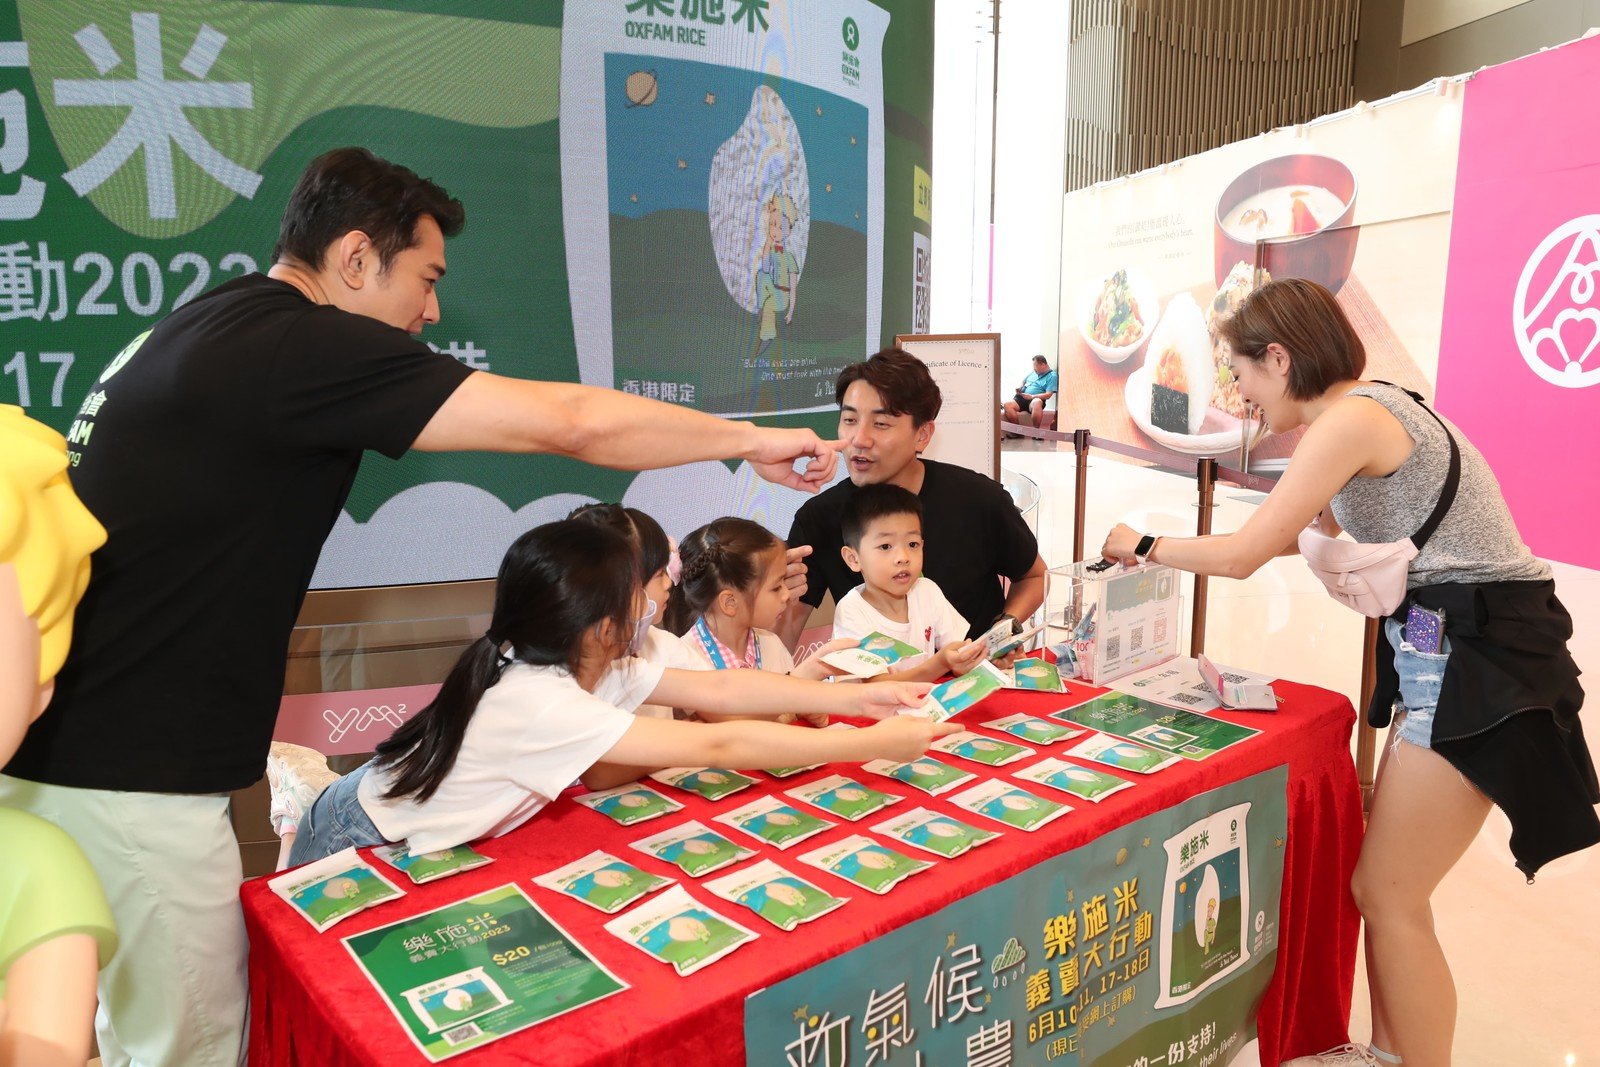 Artists Tony Hung (right 2) and Stefan Wong (left 1), and Stefan Wong’s daughter (left 2) and friends selling Oxfam Rice to support small farmers living in poverty.